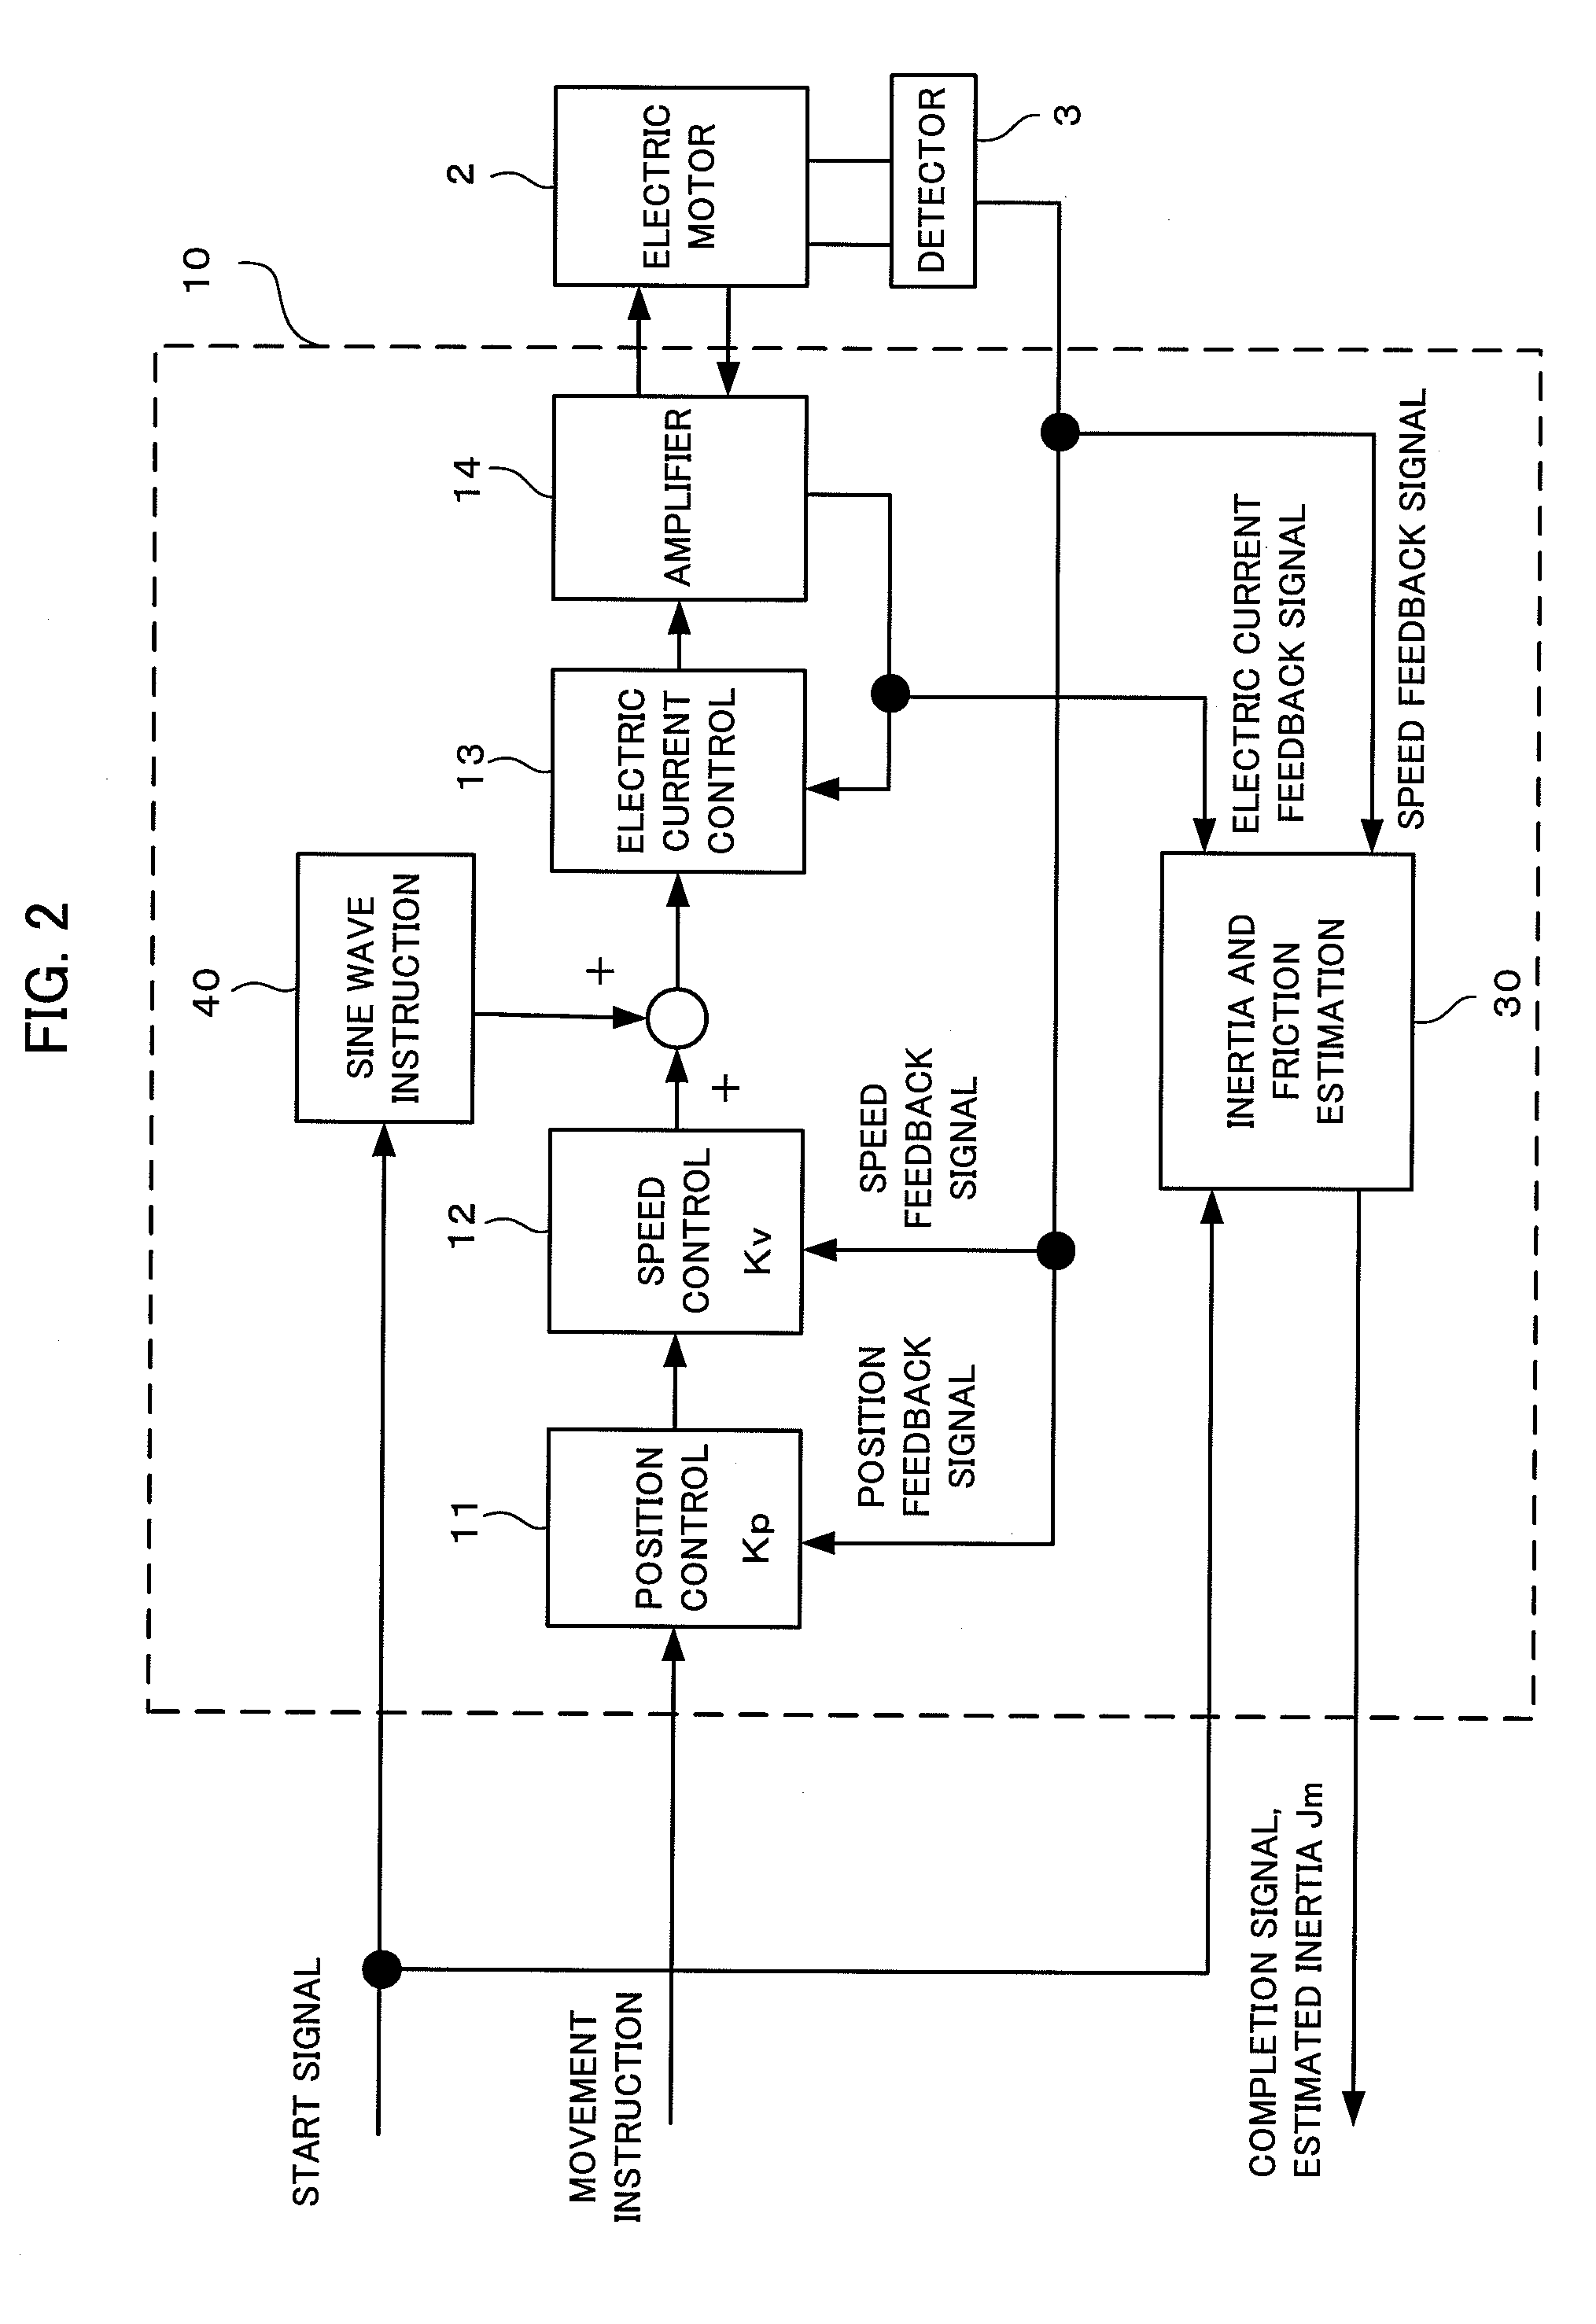 Controller of electric motor having function of estimating inertia and friction simultaneously